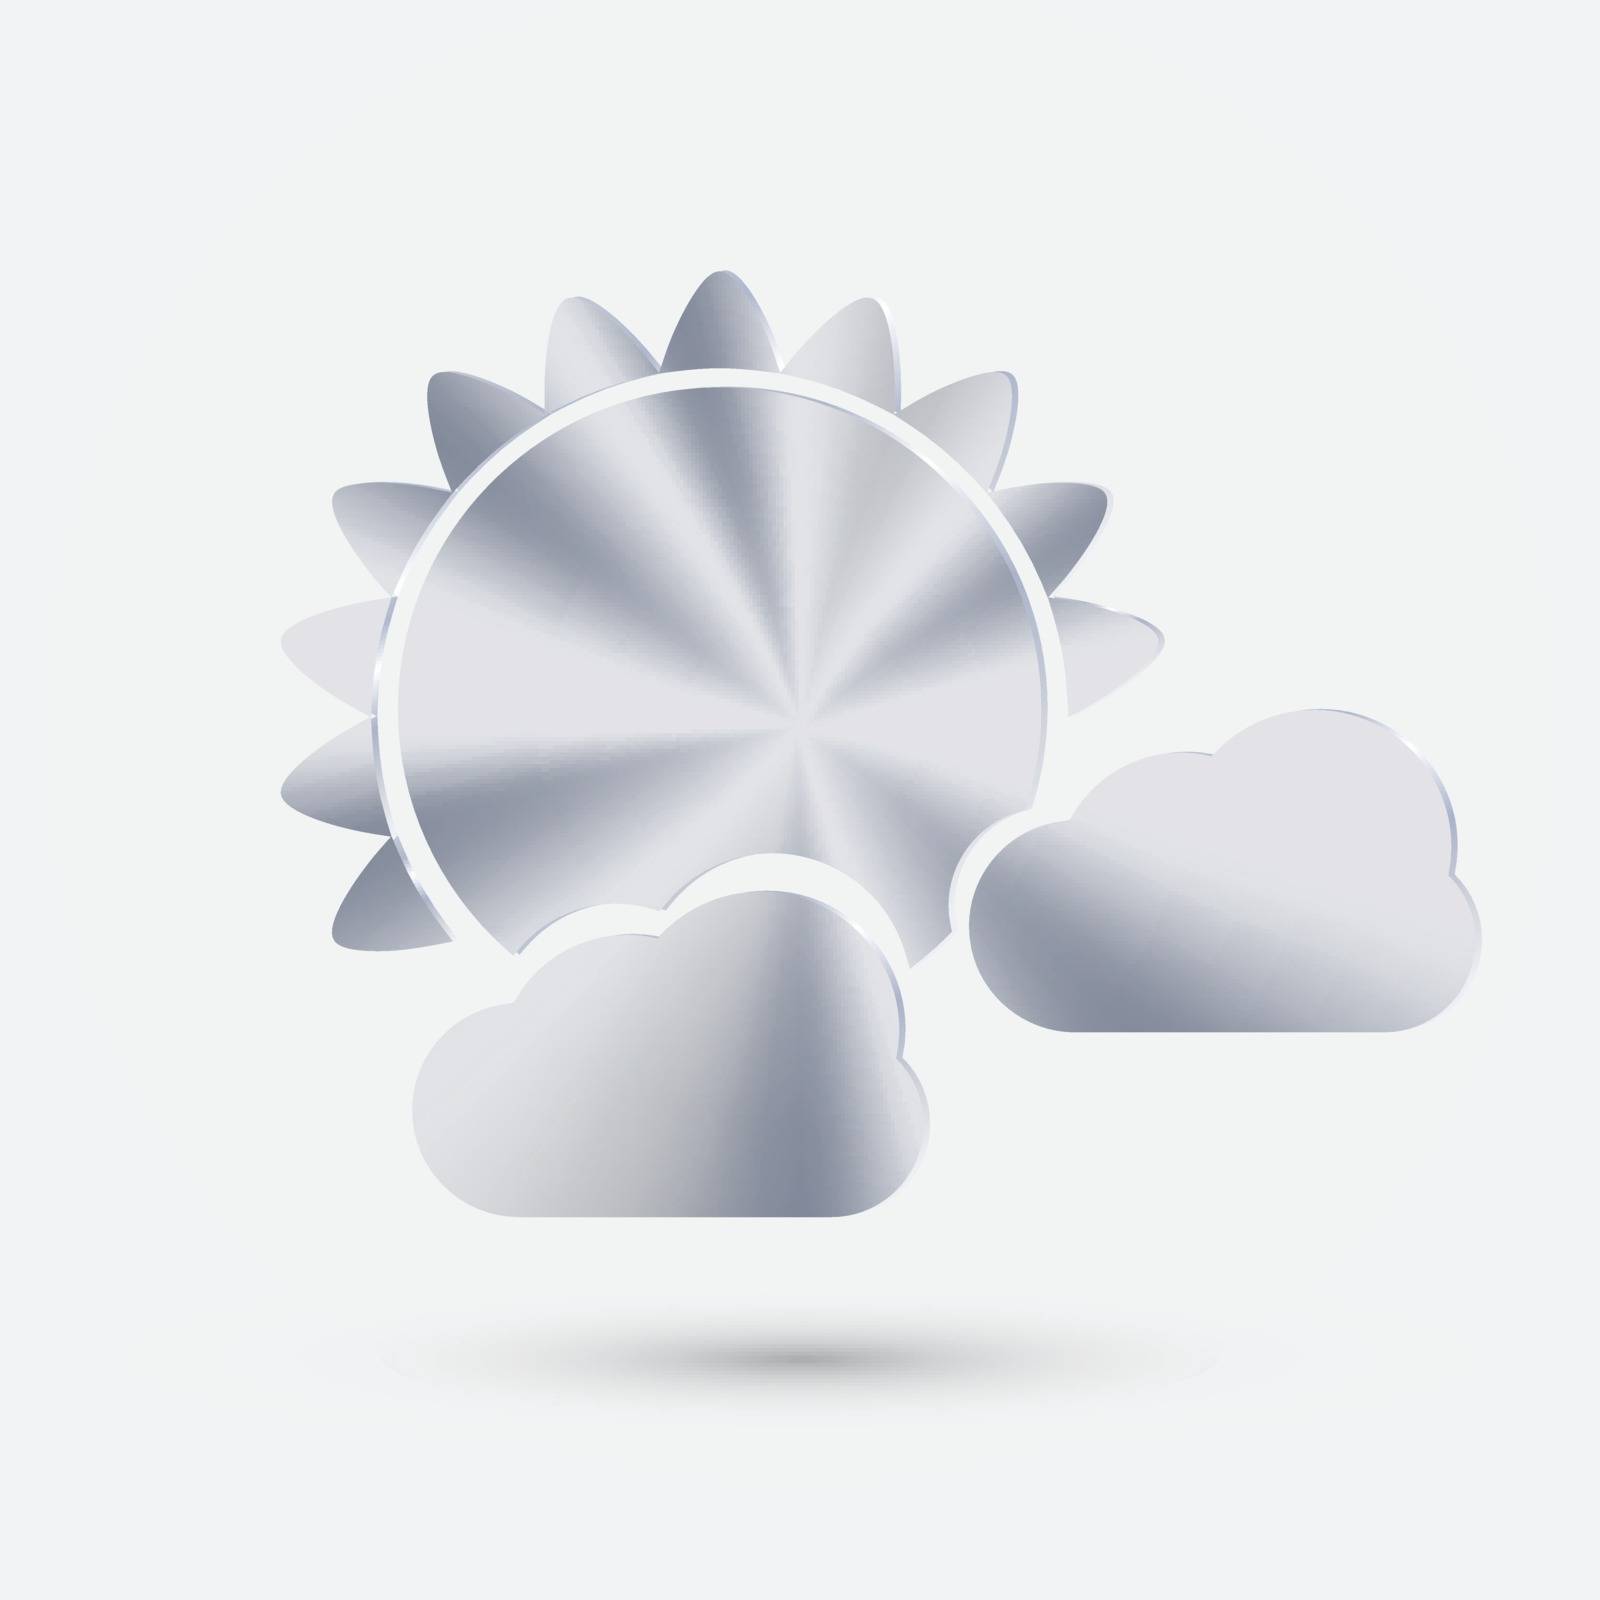 steel icon, sun behind the cloud by LittleCuckoo